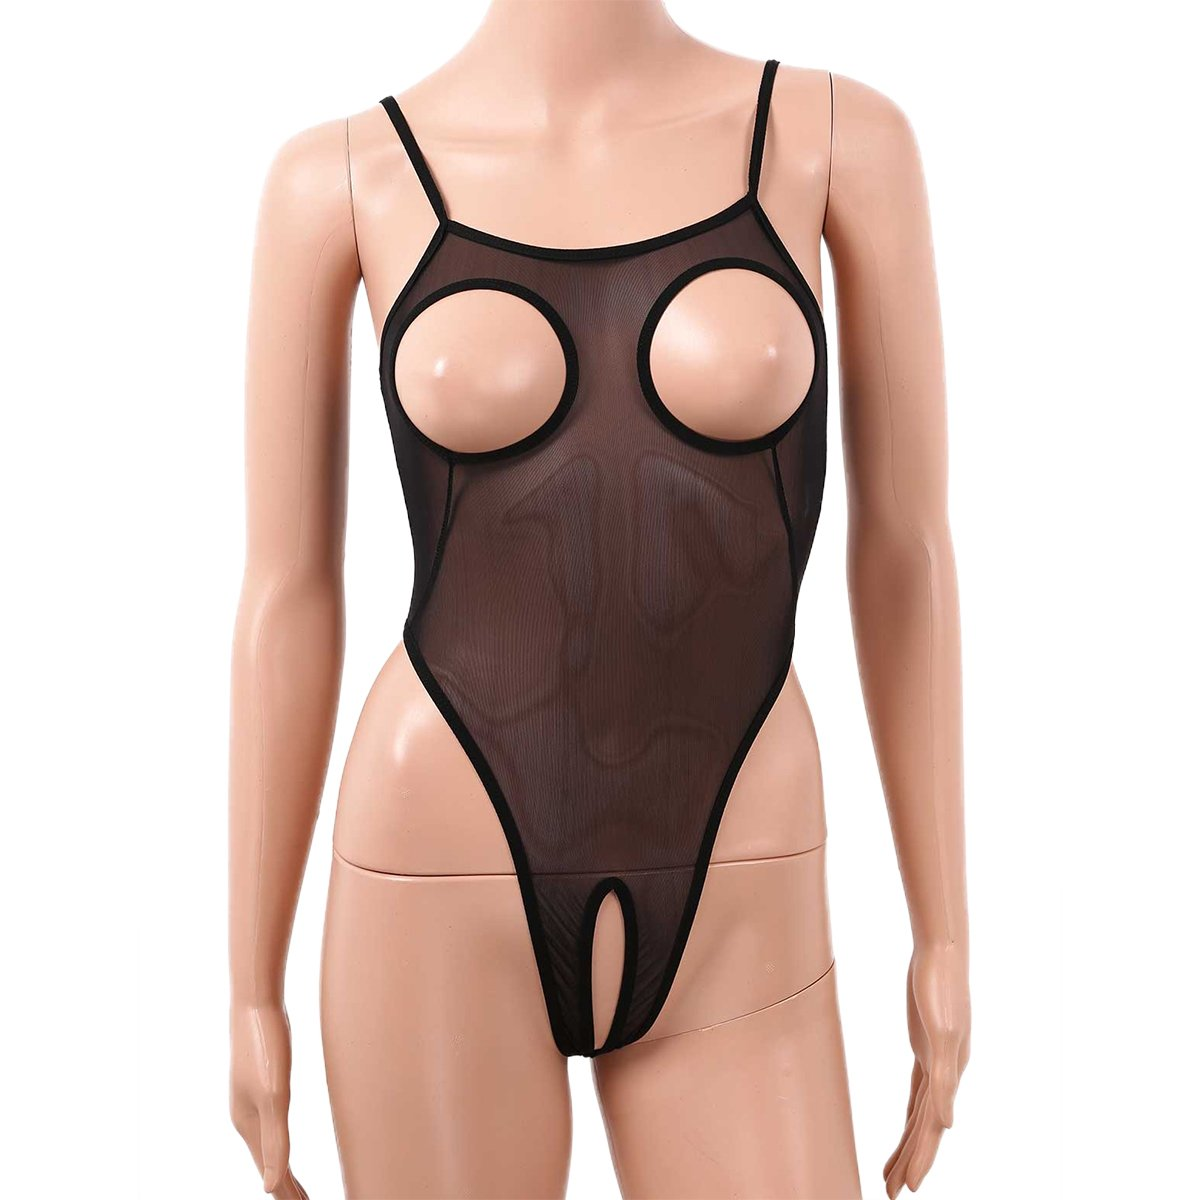 Women's Mesh Crotchless Catsuit with Nipples Holes / Female Erotic Lingerie - EVE's SECRETS